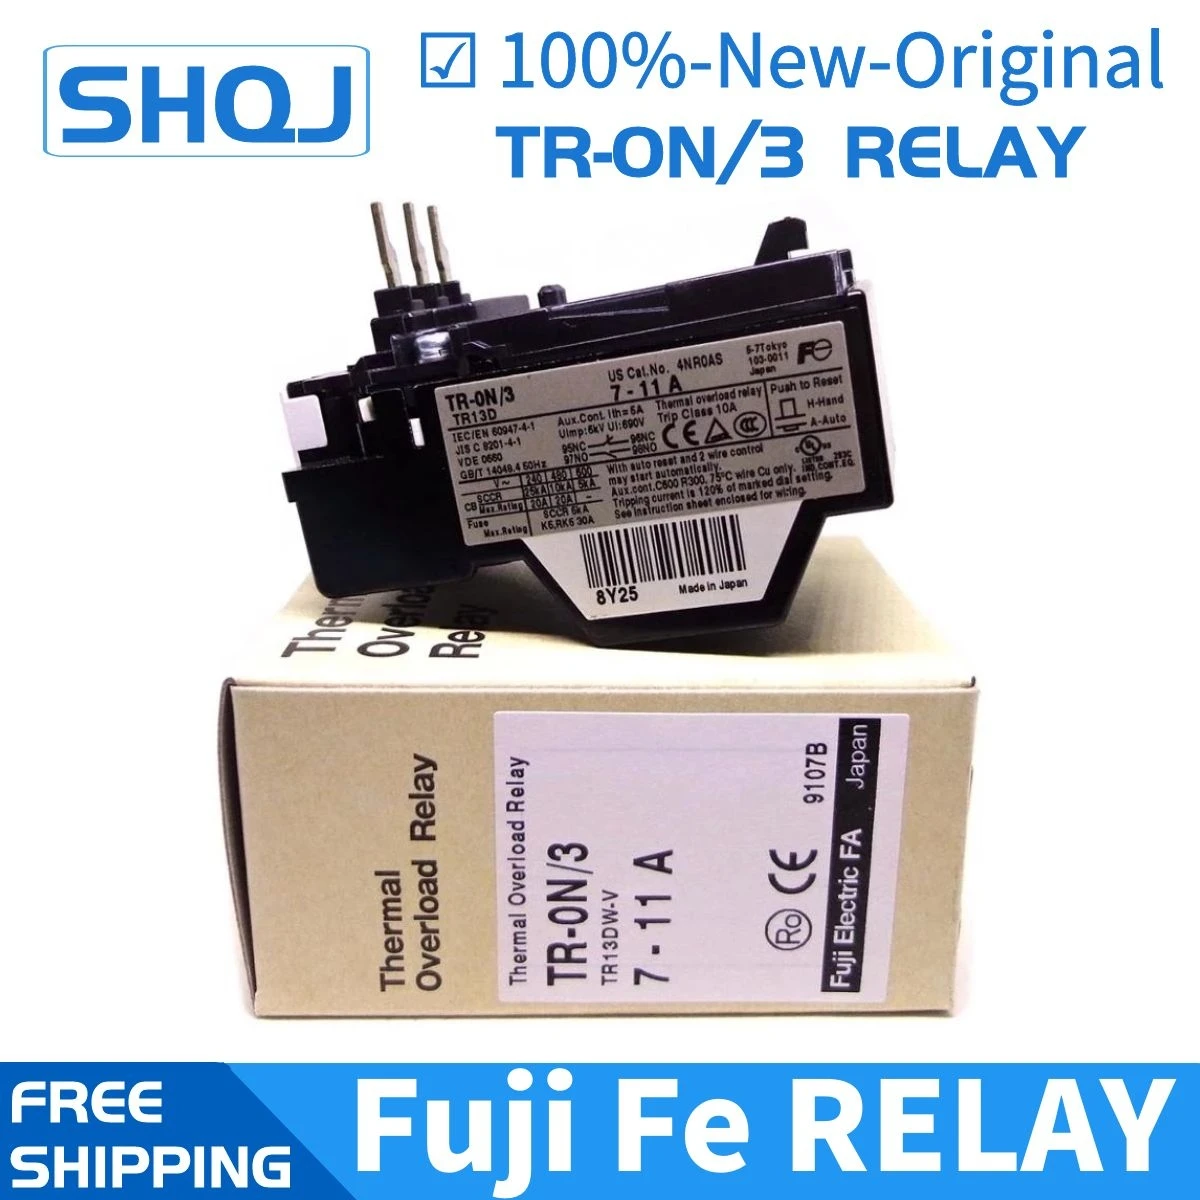 FUJI Thermal Overload Relay TR-ON/3 TR-0N/3 4.0-6.0A new in box Free ship 